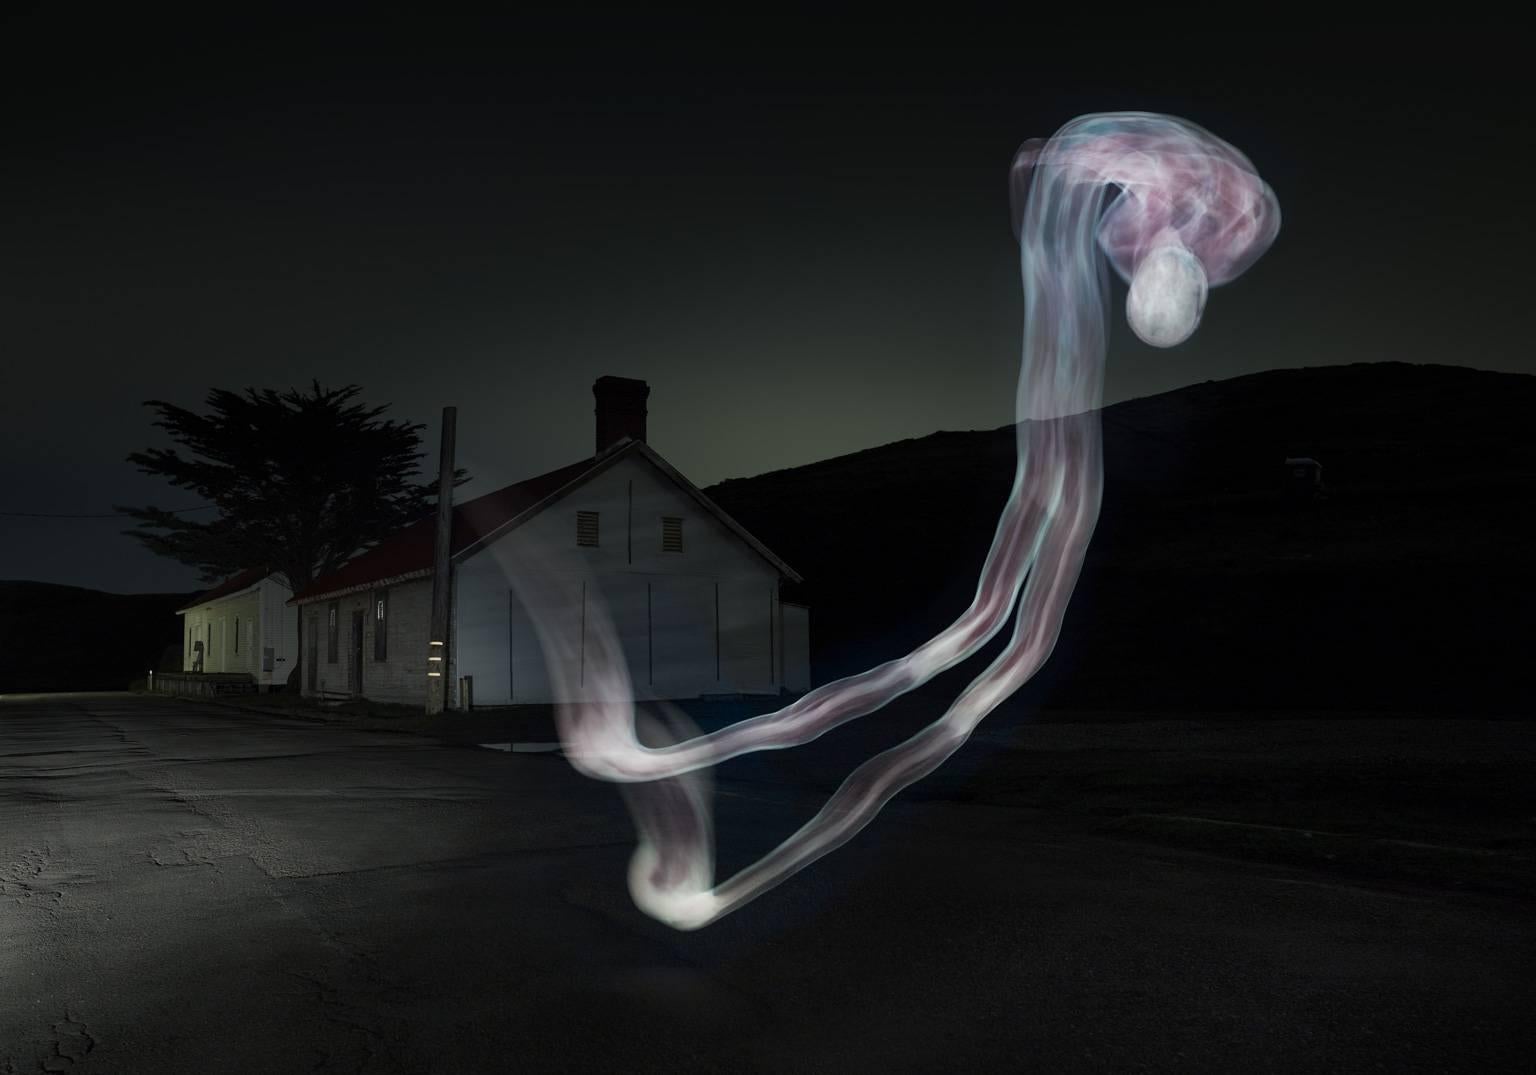 Frank Schott Abstract Print - Project 12:31 - long exposure light drawing recreating the human form 